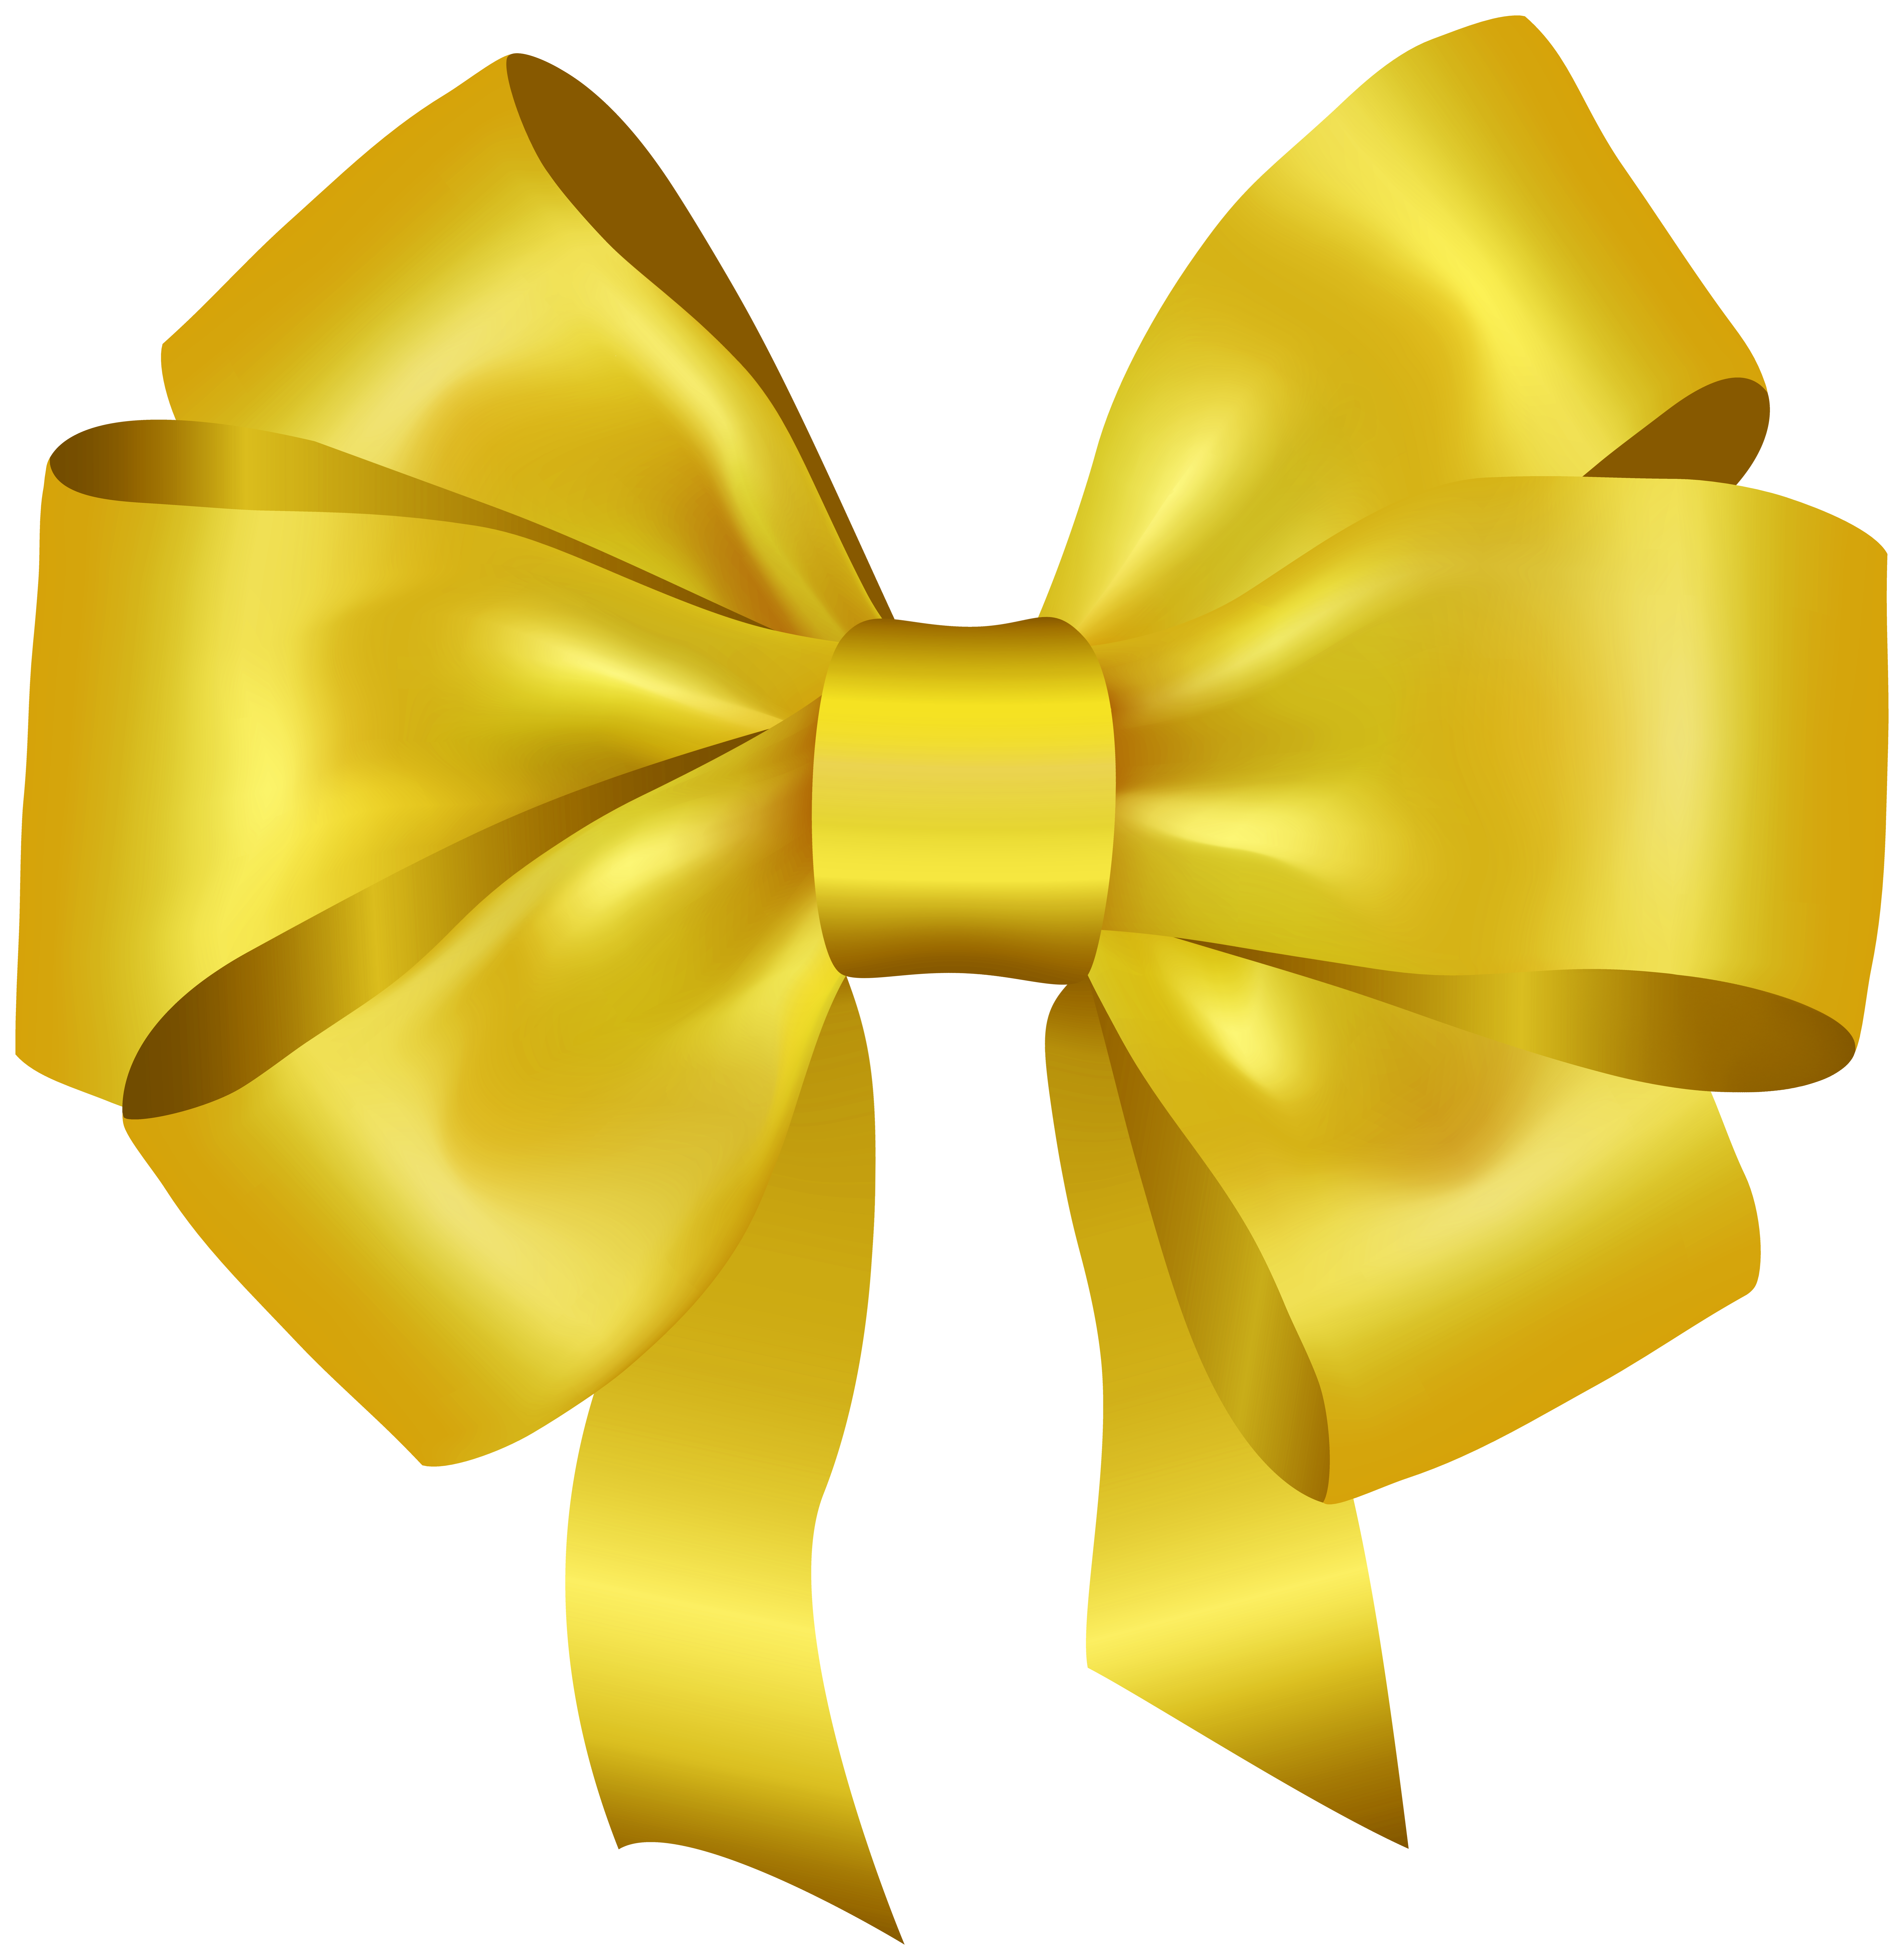 Gold Bow PNG Clip Art​, Gallery Yopriceville - High-Quality Images and  Transparent PNG Free Clipart